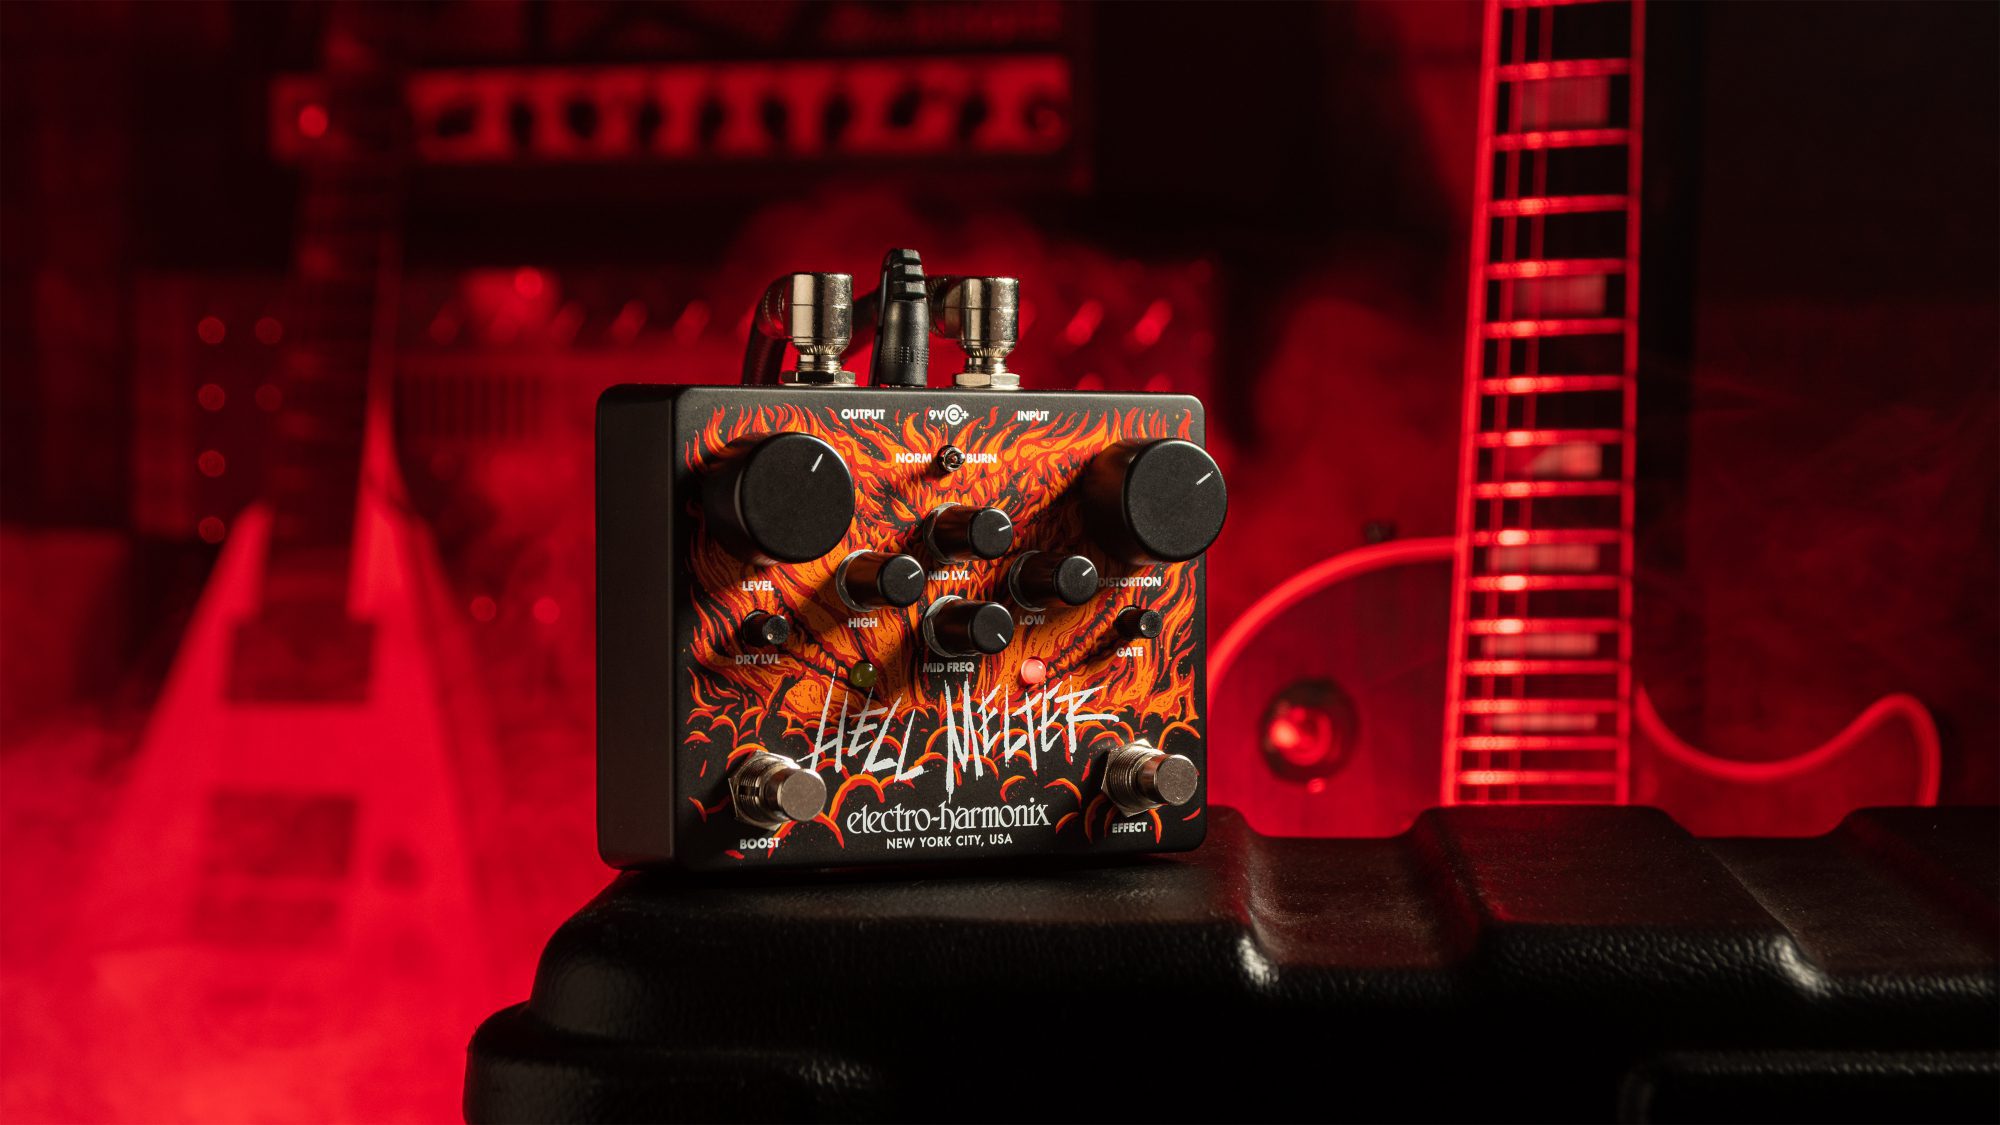 Electro-Harmonix Unleashes the Hell Melter Distortion Pedal